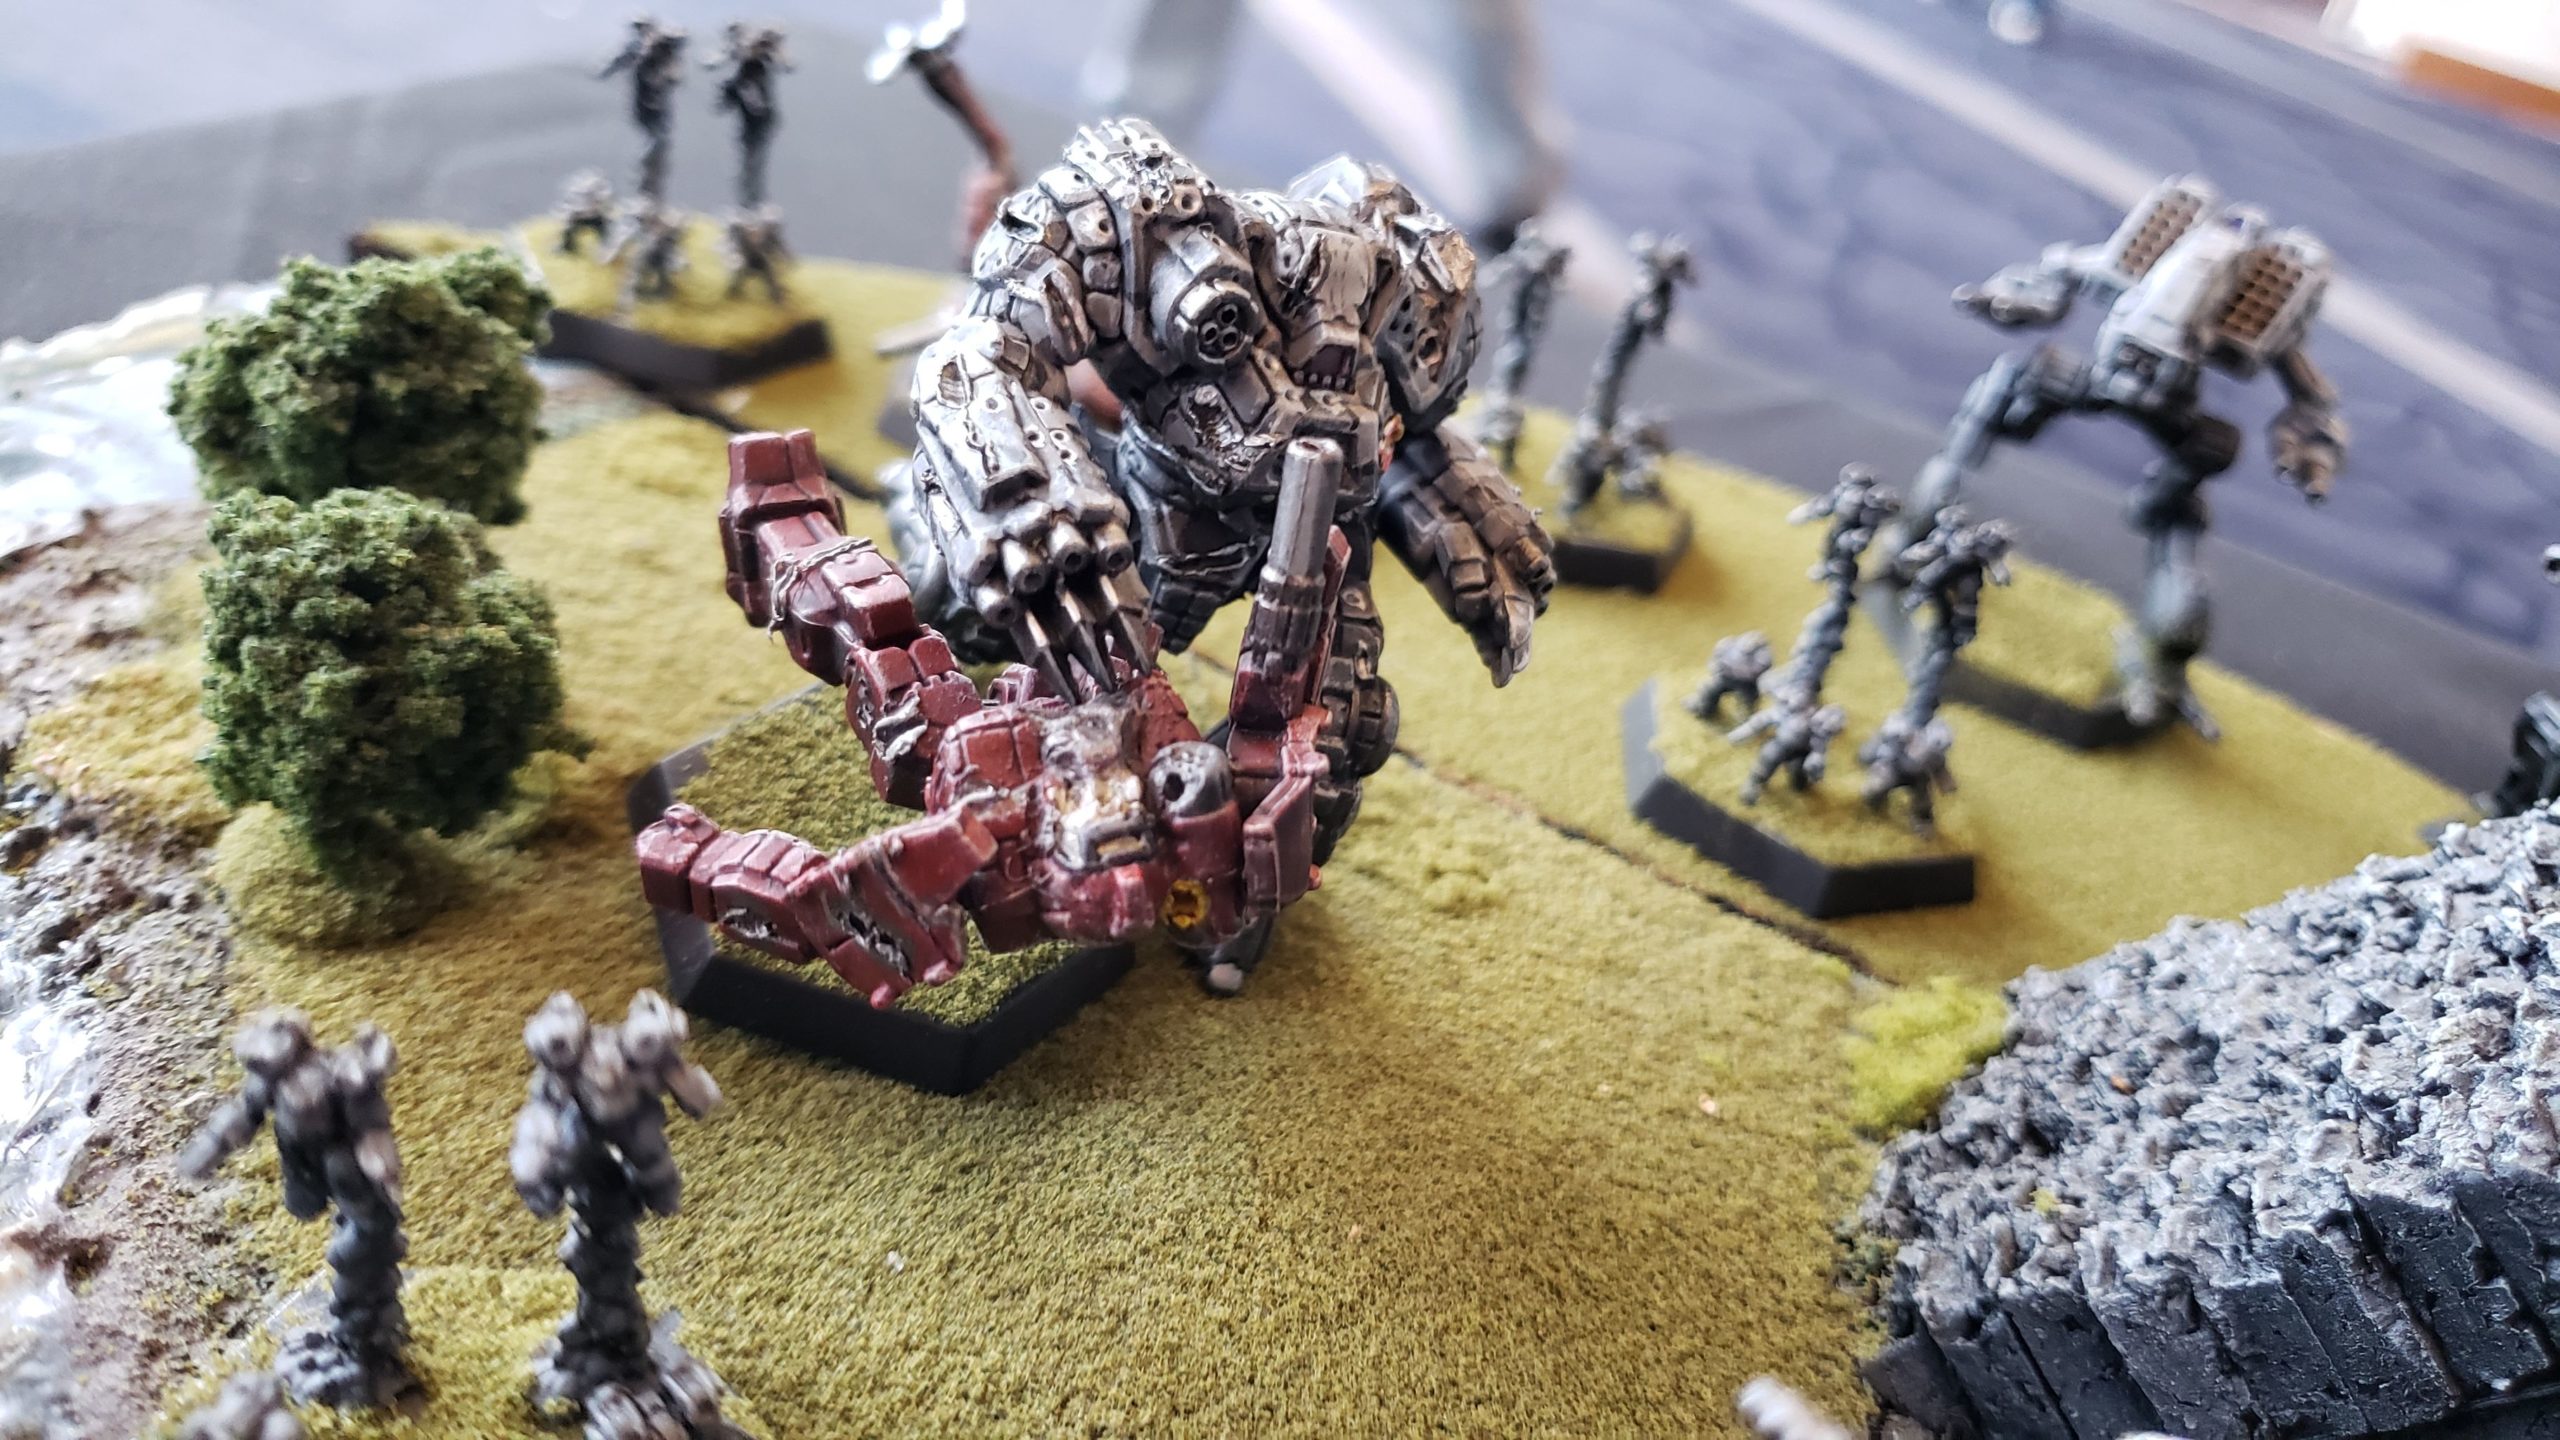 battletech — High Quality Miniature Painting At The Lowest Rates